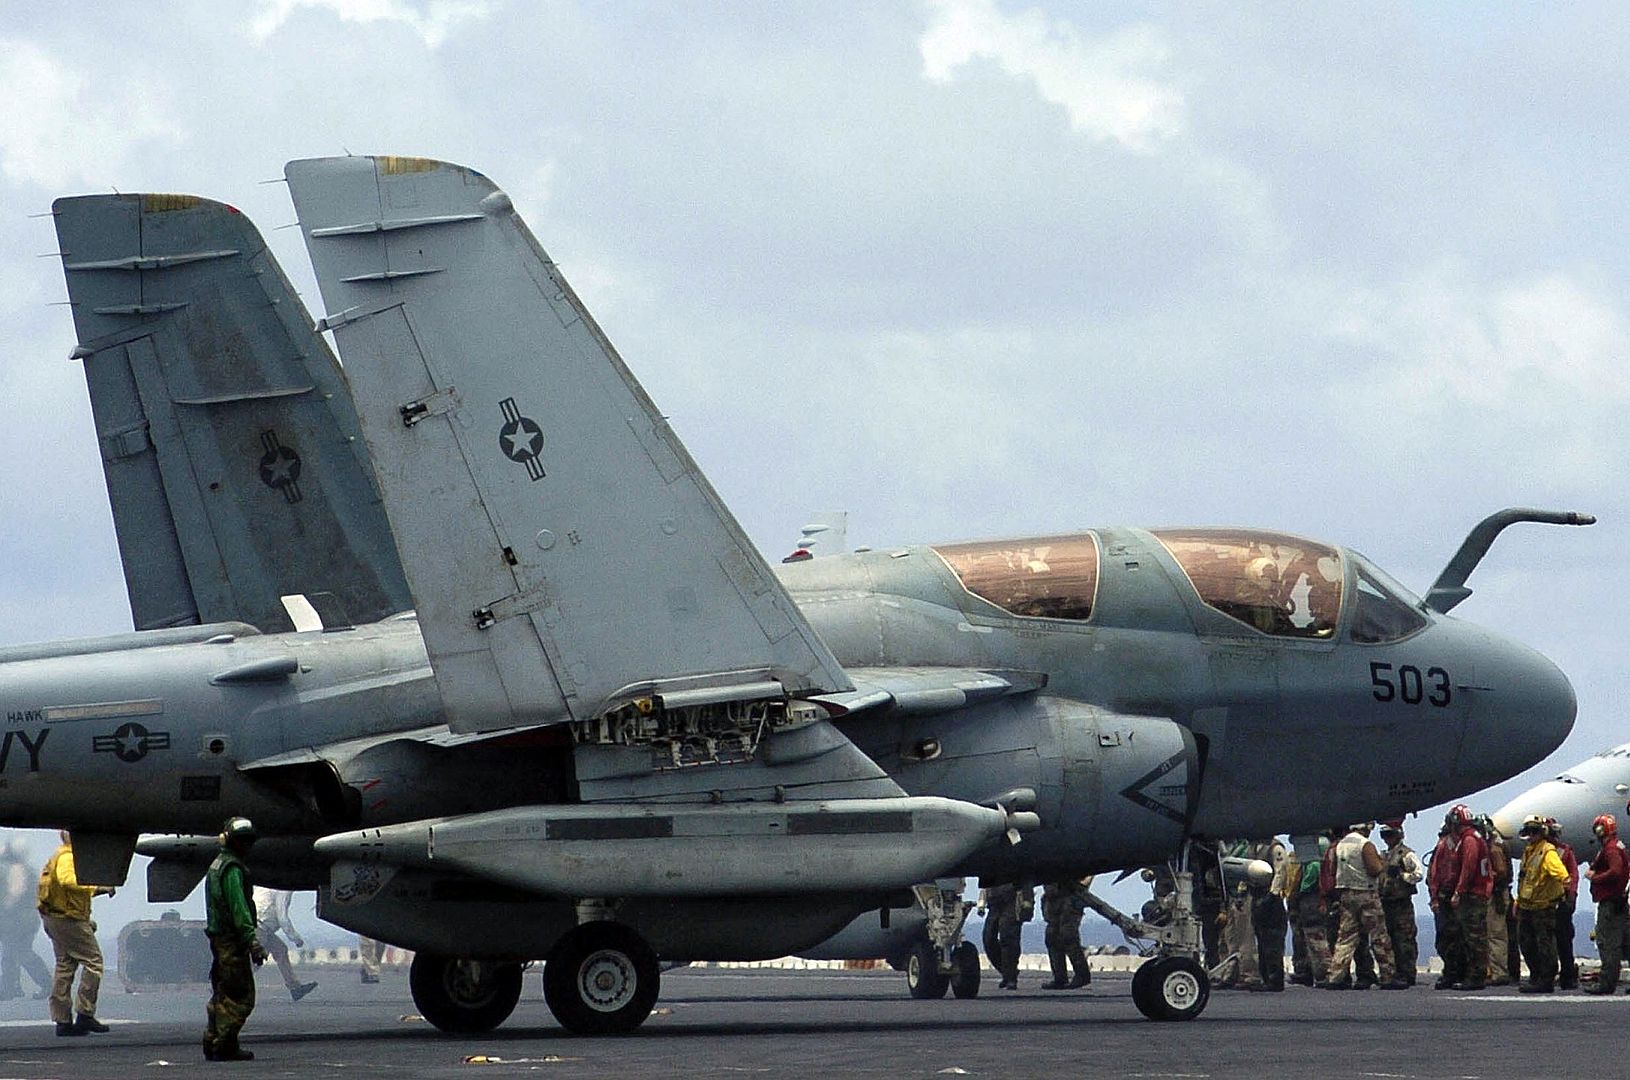 6B Prowler Aircraft From Electronic Attack Squadron 136 Folds Up Its Wings Following Recovery On The Flight Deck Of The Aircraft Carrier USS KITTY HAWK